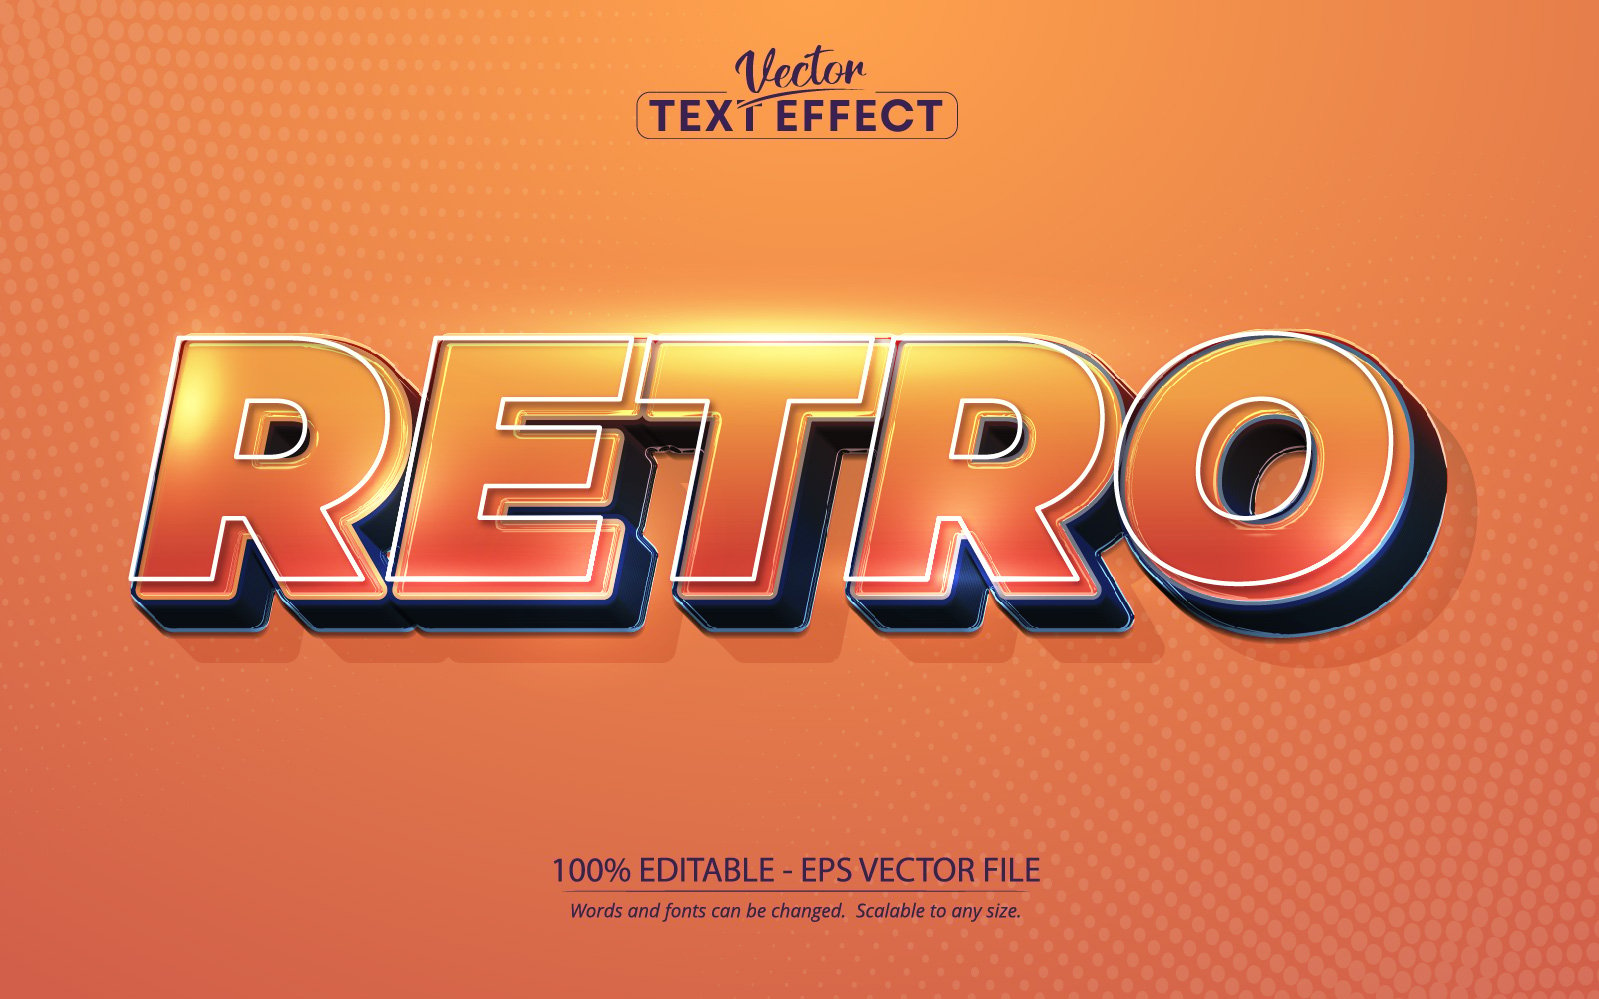 Retro - Editable Text Effect, Vintage And Retro 80s 70s Text Style, Graphics Illustration